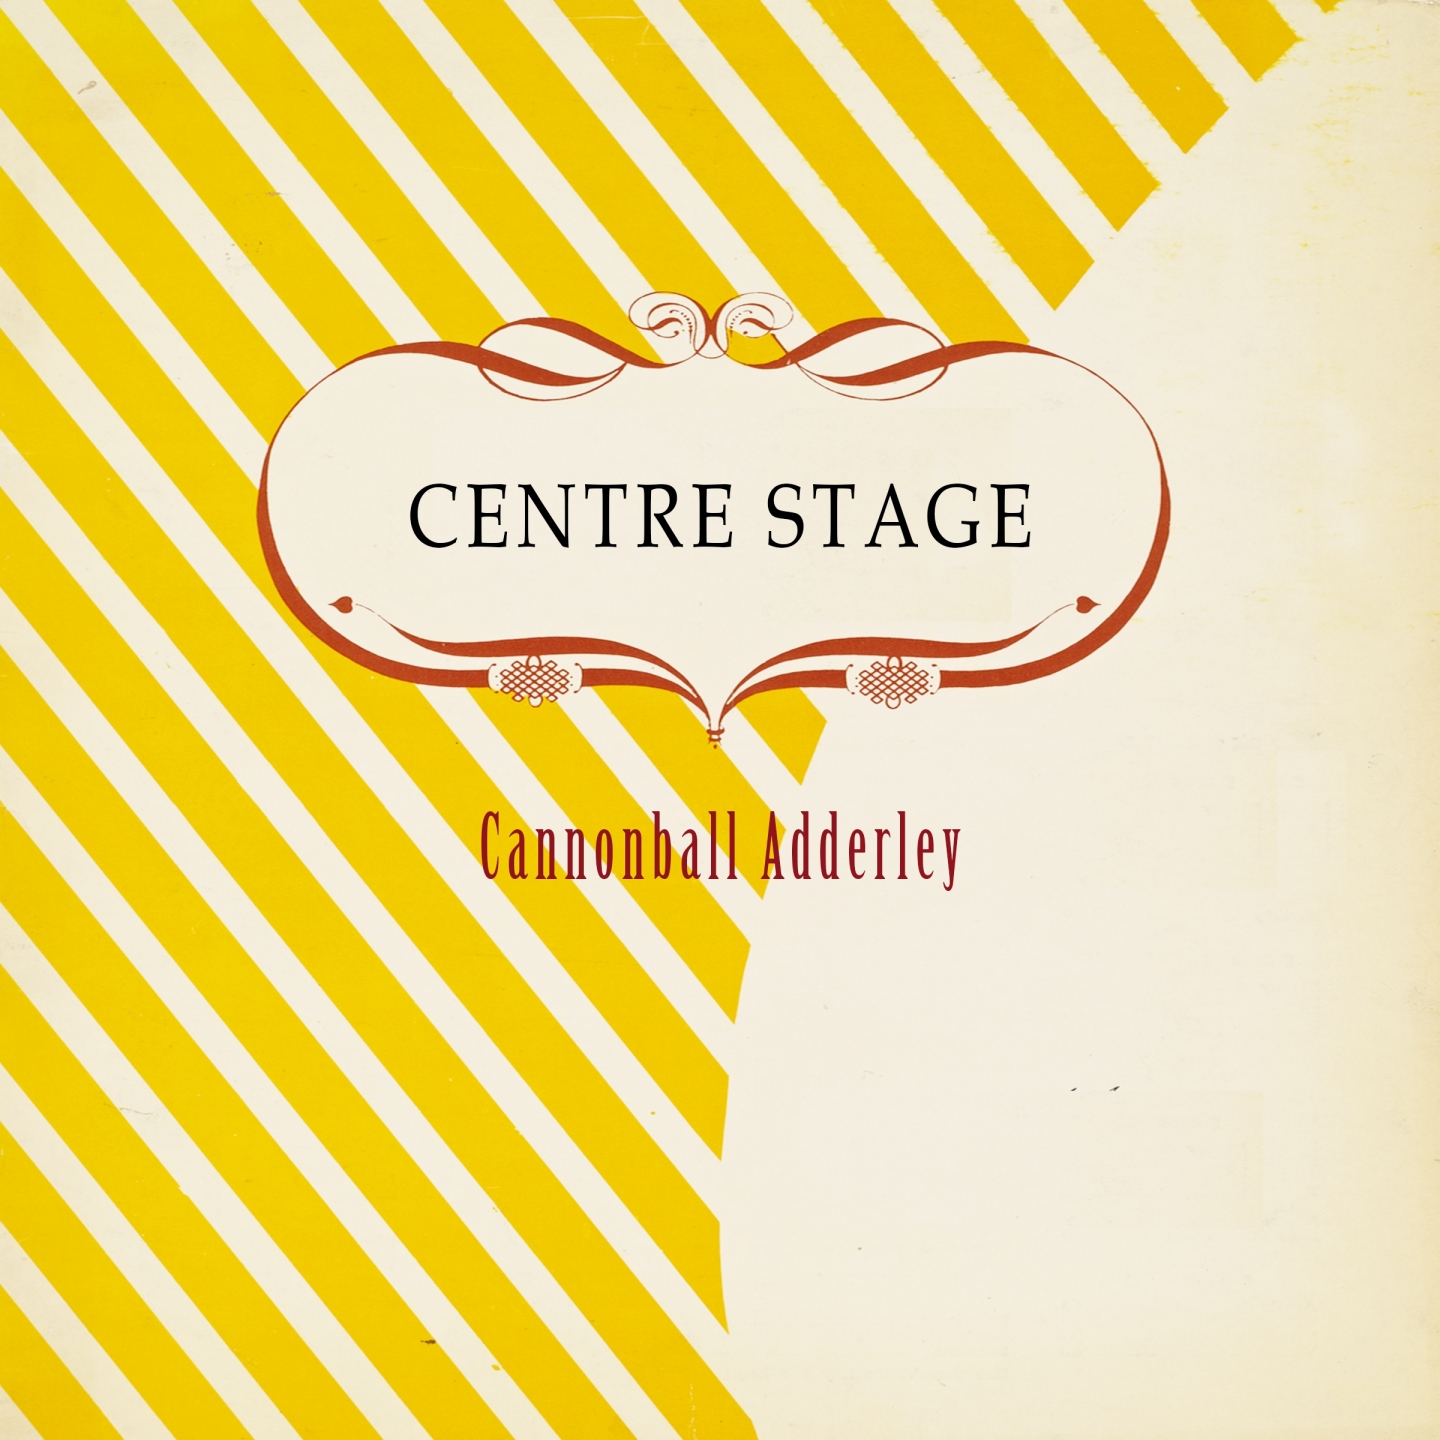 Centre Stage